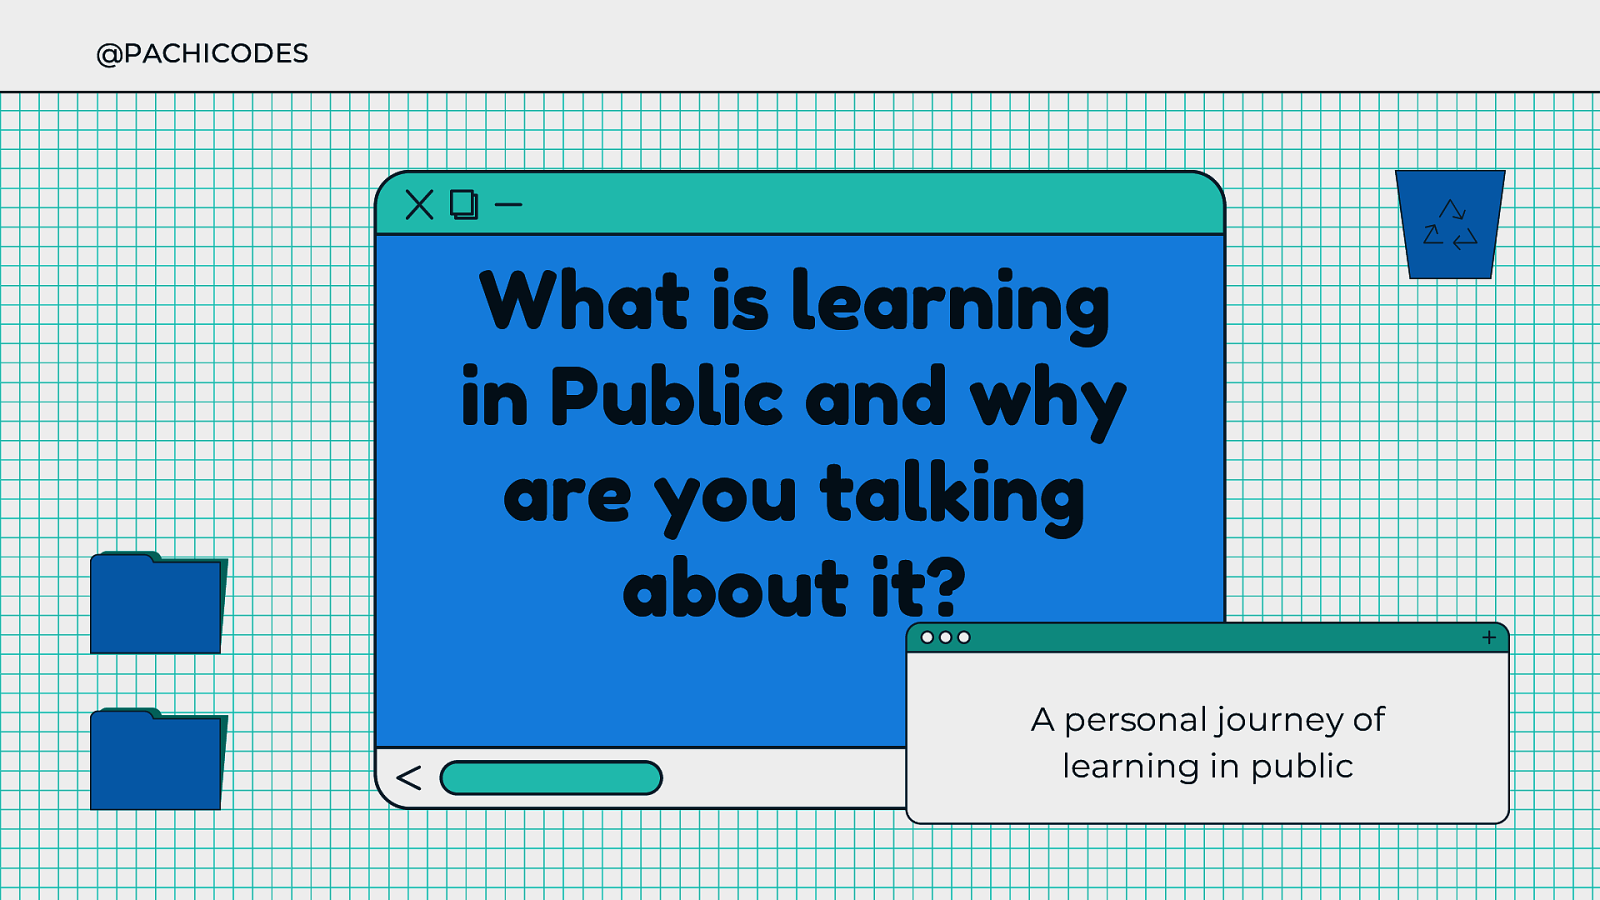 What is learning in Public and why are you talking about it?